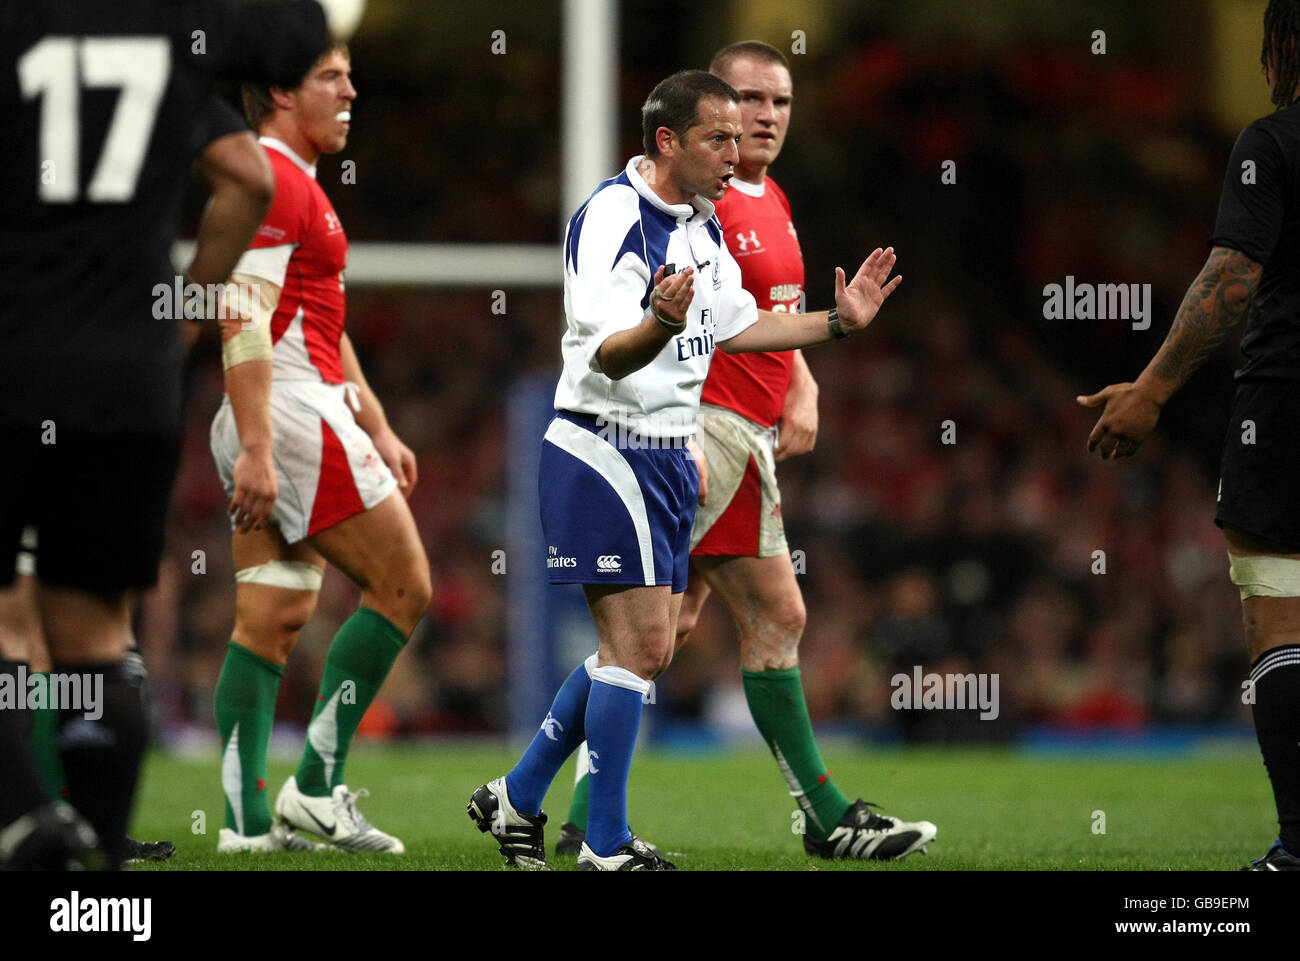 Rugby Union - Invesco Perpetual Series - Wales v New Zealand - Millennium Stadium. Referee Jonathan Kaplan of South Africa during the Invesco Perpetual Series match at the Millennium Stadium, Cardiff. Stock Photo